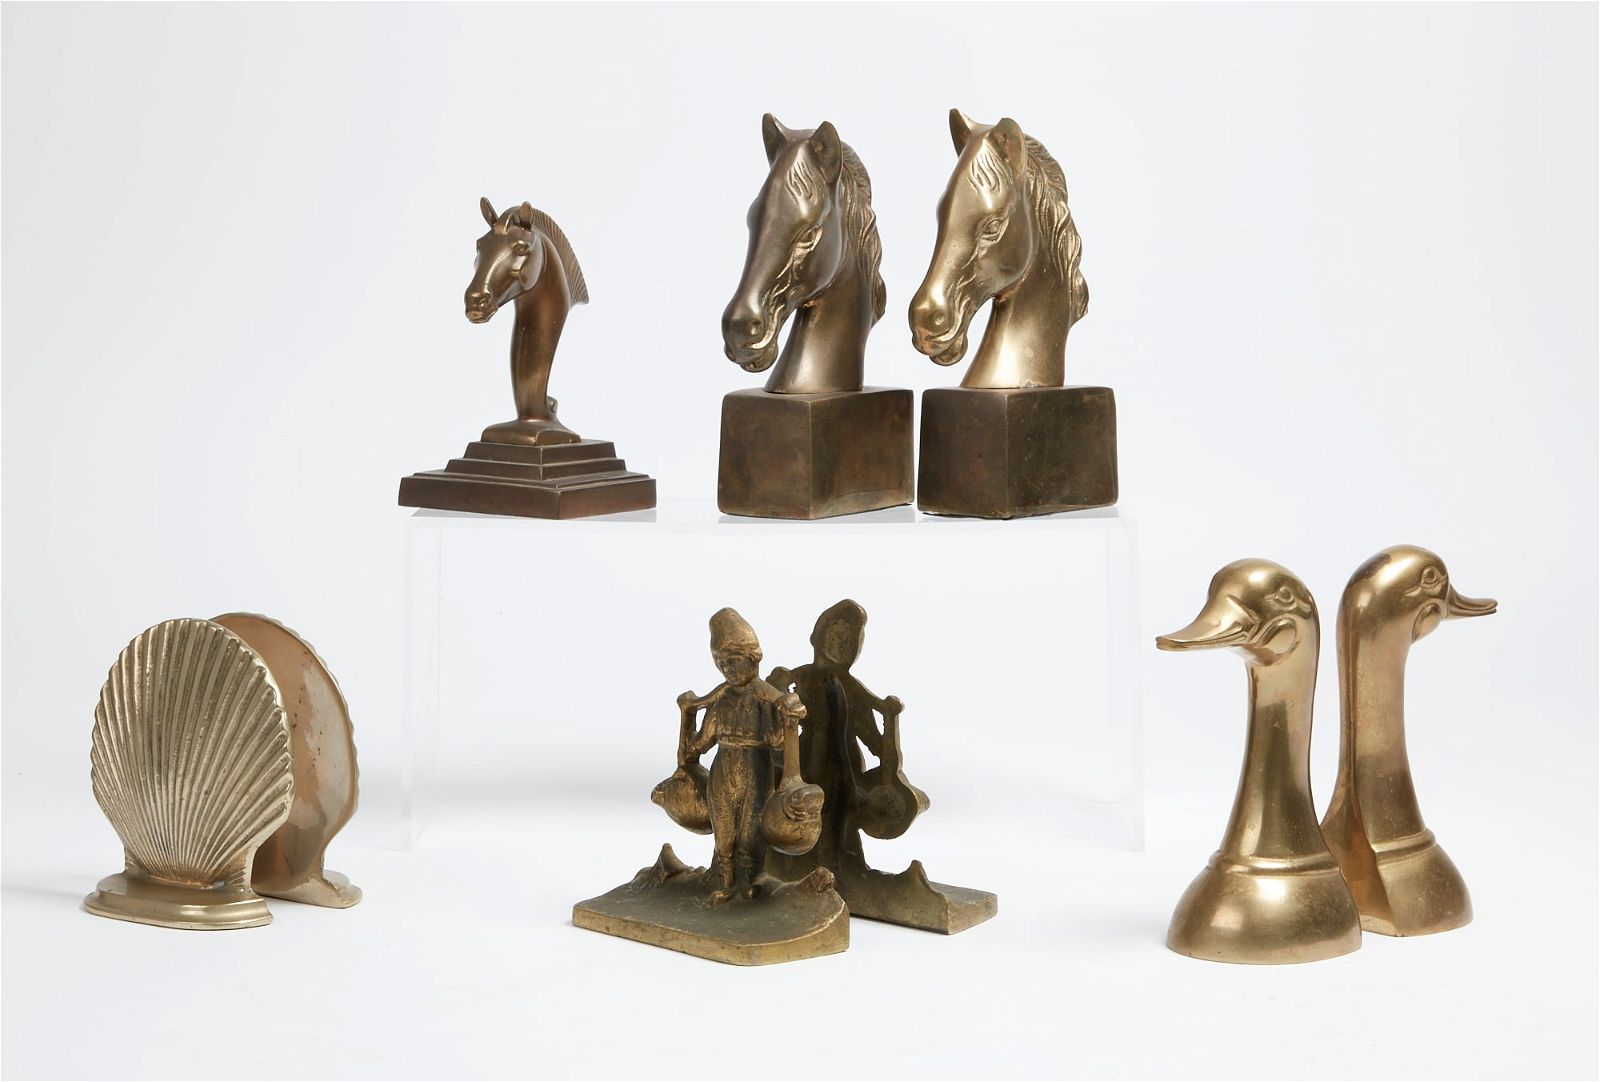 FOUR PAIRS OF BRASS BOOKENDSFour